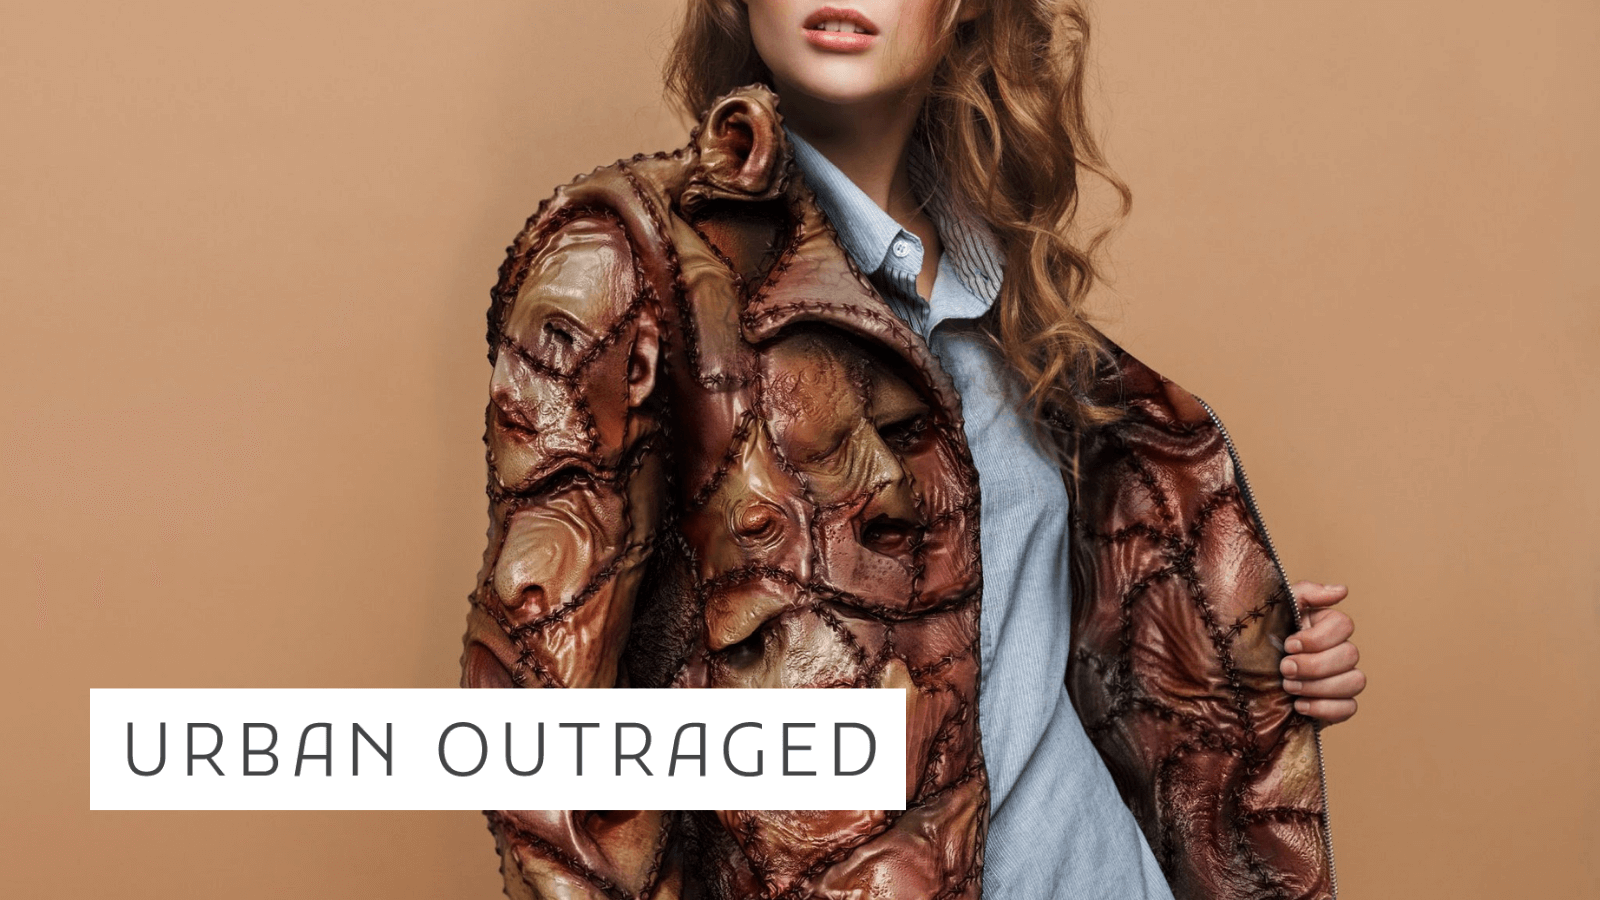 New Fashion Range Made With 'Human Skin' Takes Aim At Urban Outfitters For  Using Leather - Plant Based News